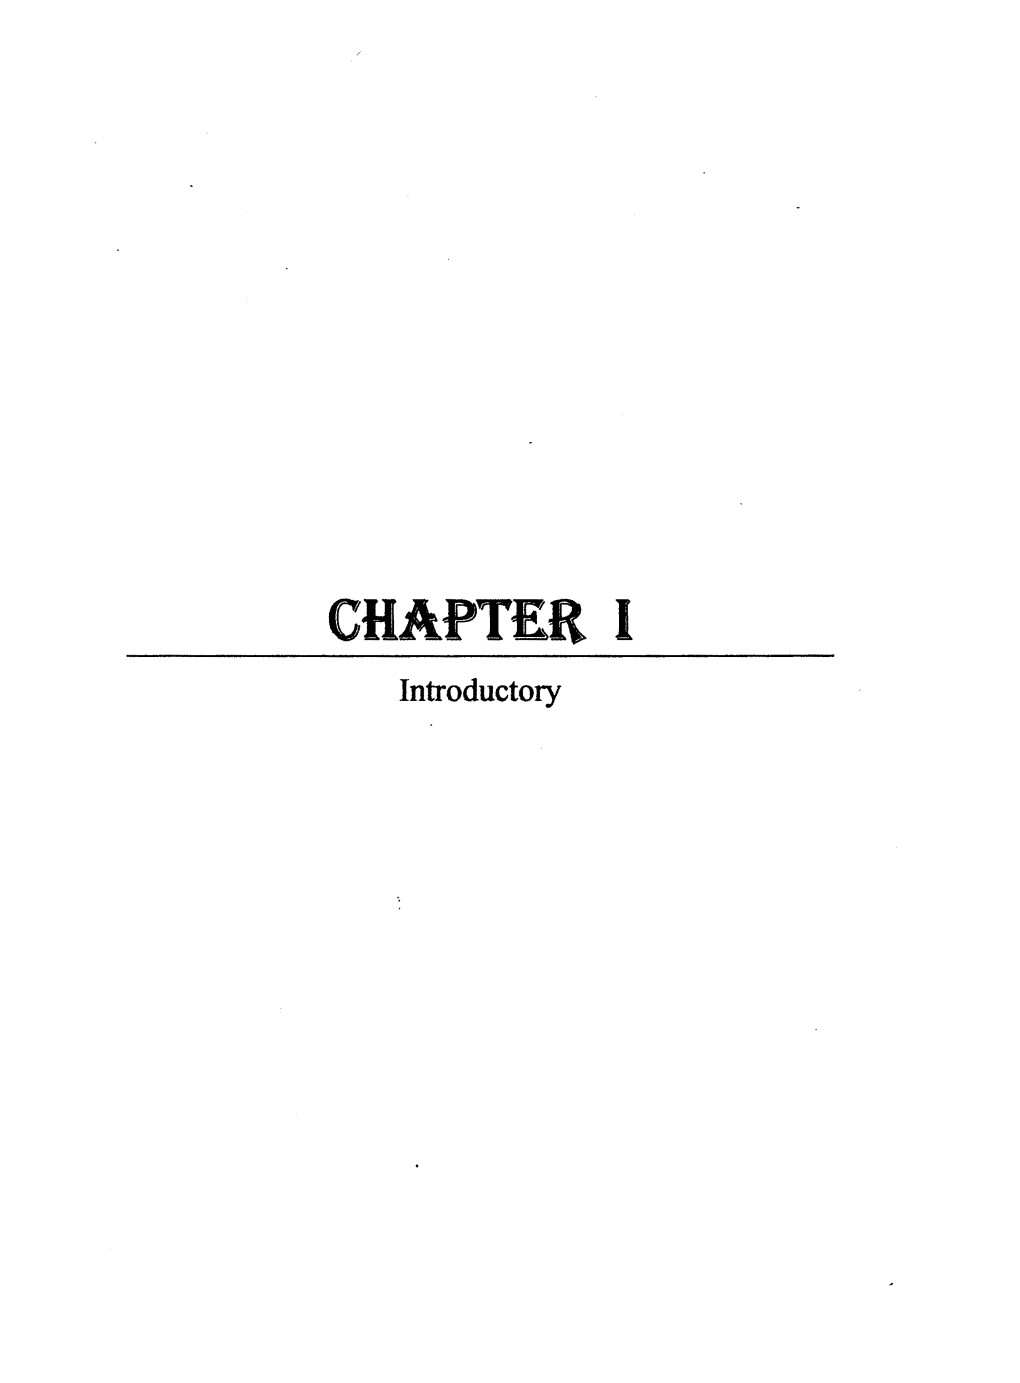 Introductory CHAPTER I